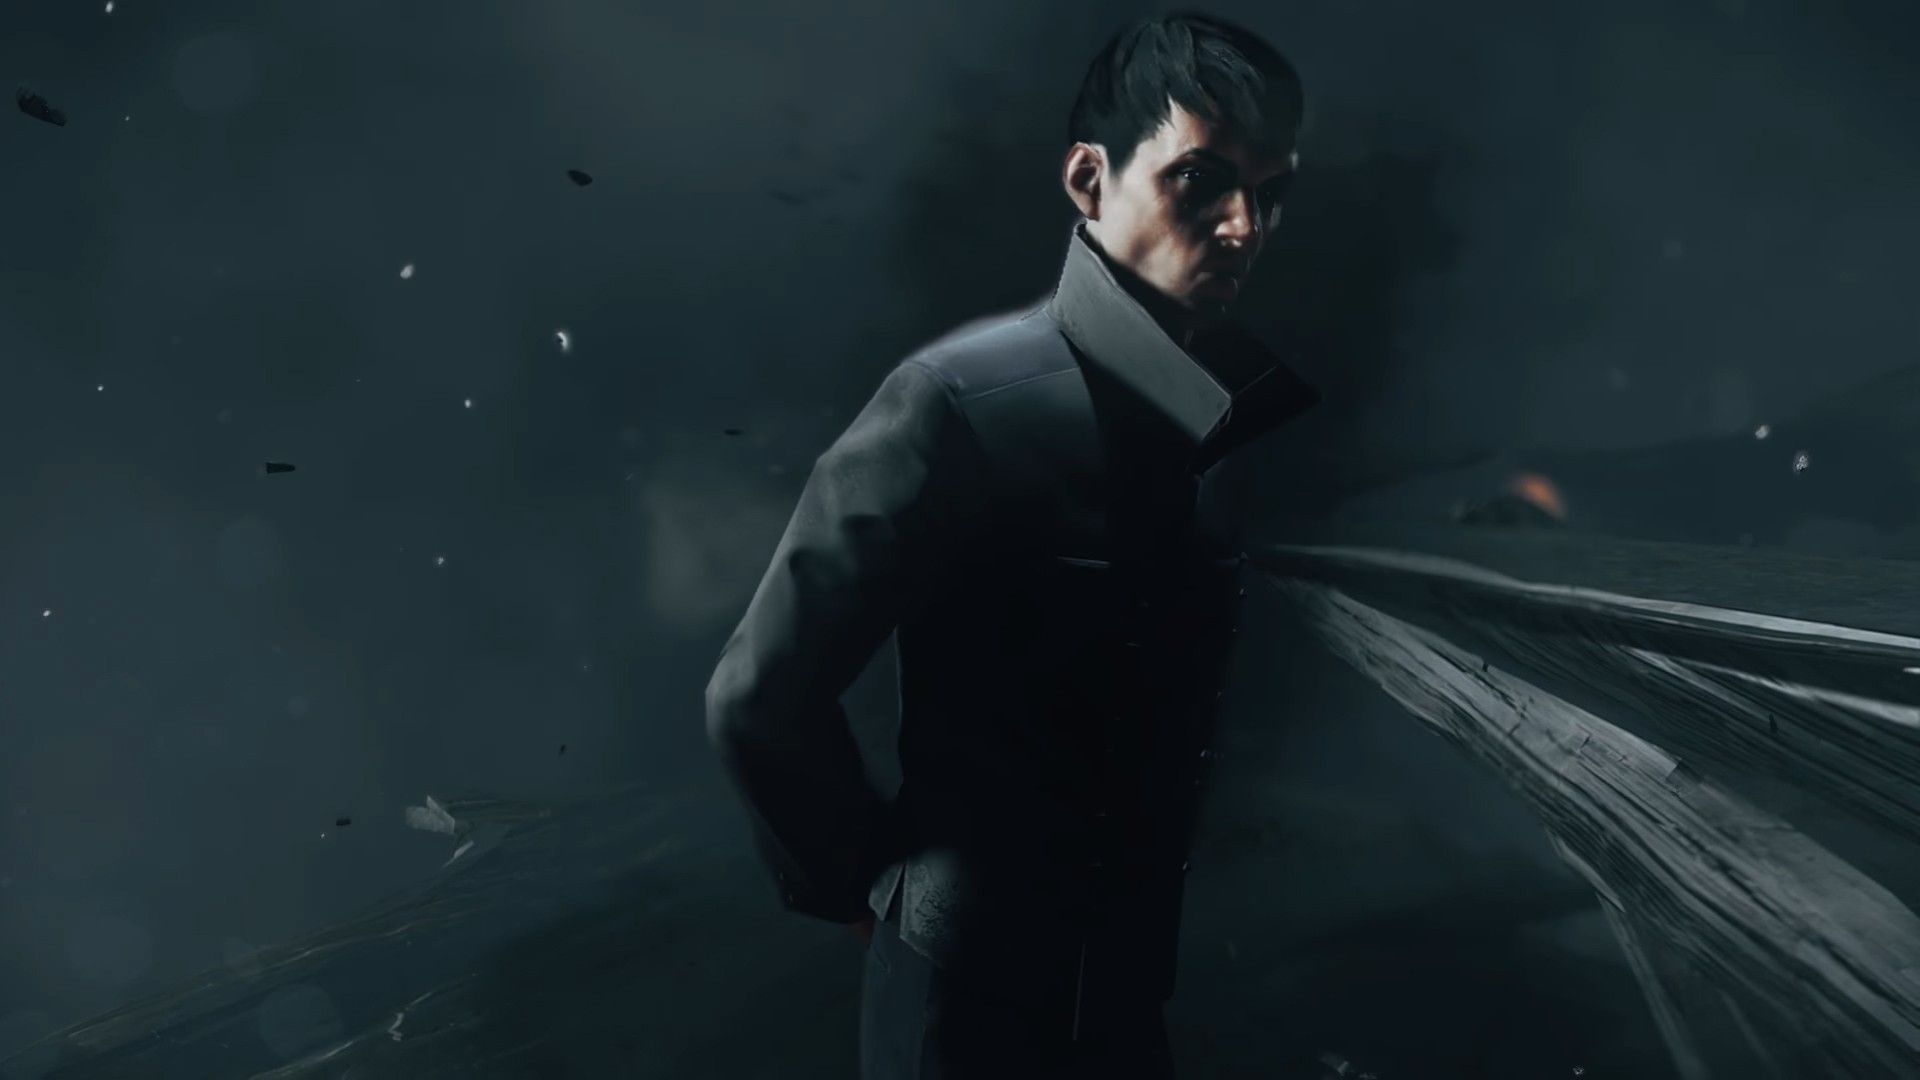 100+] Dishonored 4k Wallpapers | Wallpapers.com